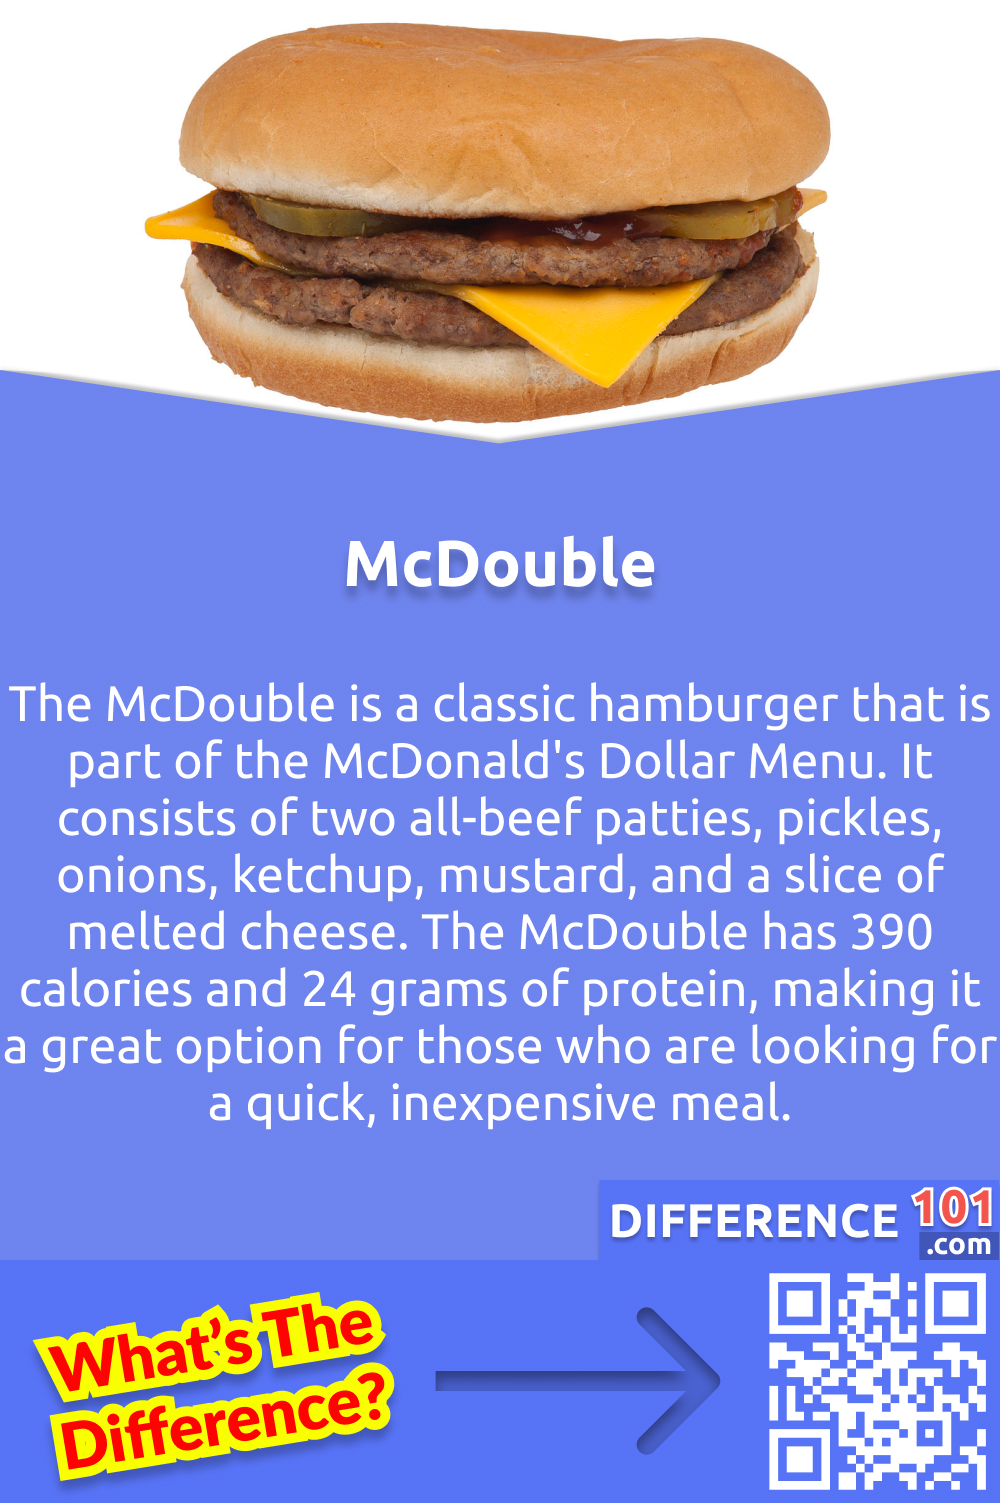 What Is McDouble? The McDonald's McDouble is a classic hamburger that is part of the McDonald's Dollar Menu. It consists of two all-beef patties, pickles, onions, ketchup, mustard, and a slice of melted cheese. The McDouble has 390 calories and 24 grams of protein, making it a great option for those who are looking for a quick, inexpensive meal. It also has 18 grams of fat, which makes it a healthier option than some of the other burgers on the McDonald's menu. The McDouble is also a great source of calcium, iron, and various vitamins and minerals. All of these qualities make the McDouble a great choice for those who are looking for a convenient, nutritious meal.